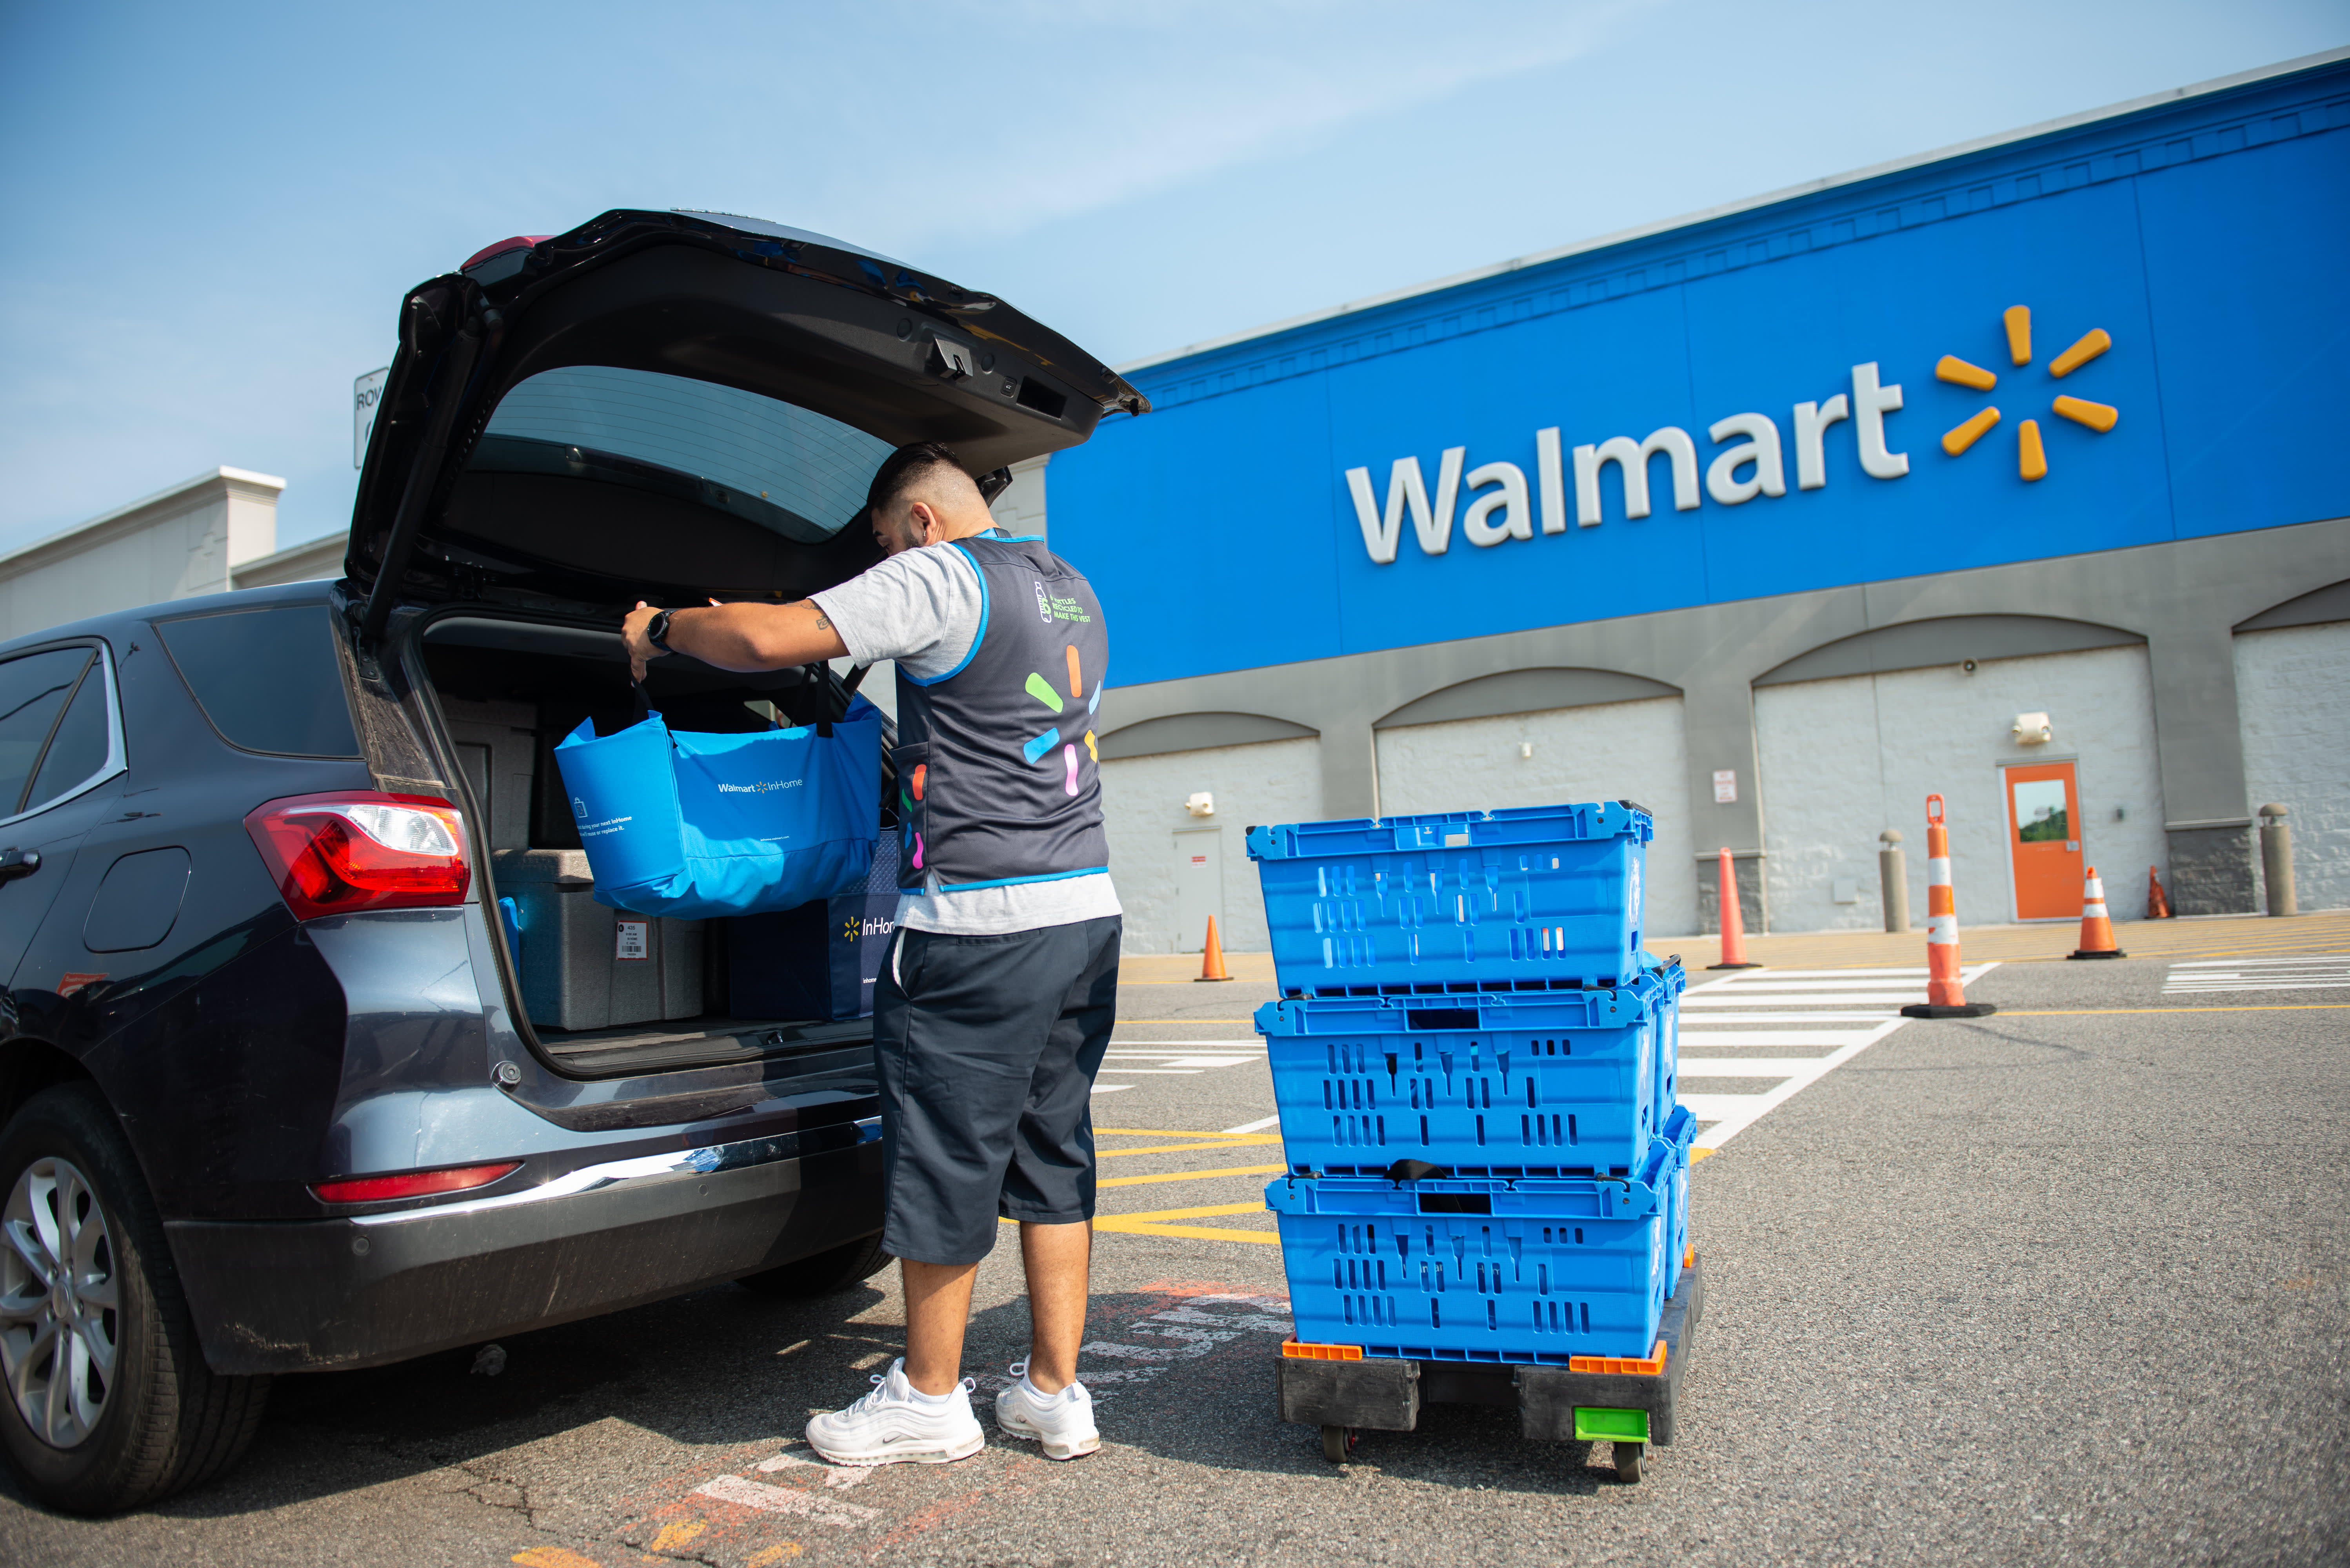 How groceries have kept Walmart the king of retail